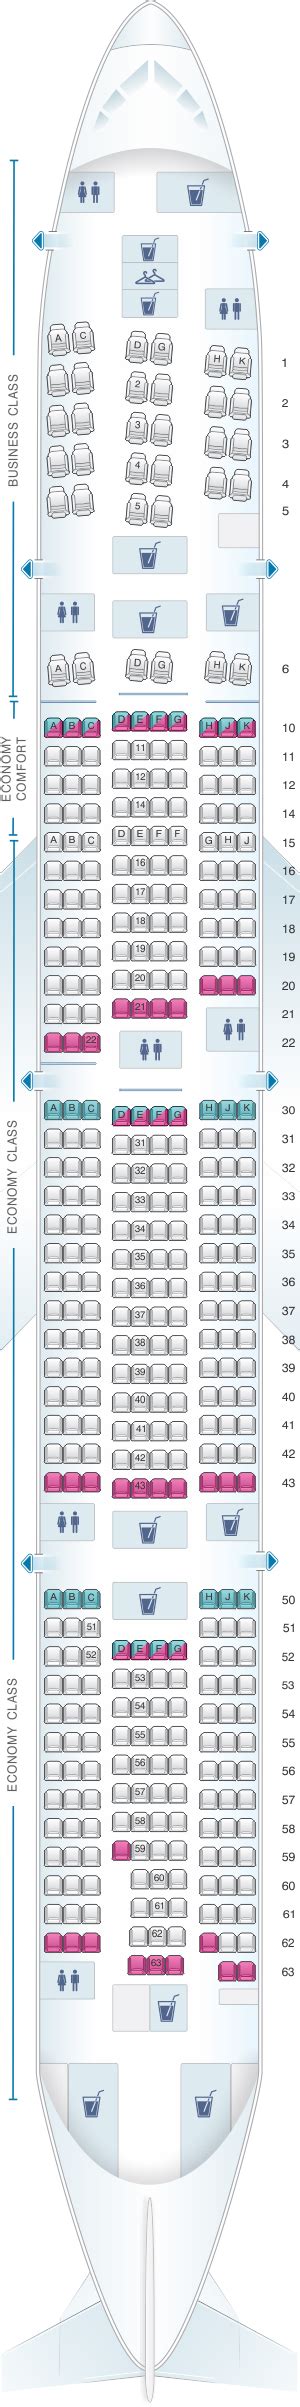 Boeing 777 200 Seat Layout Klm Two Birds Home